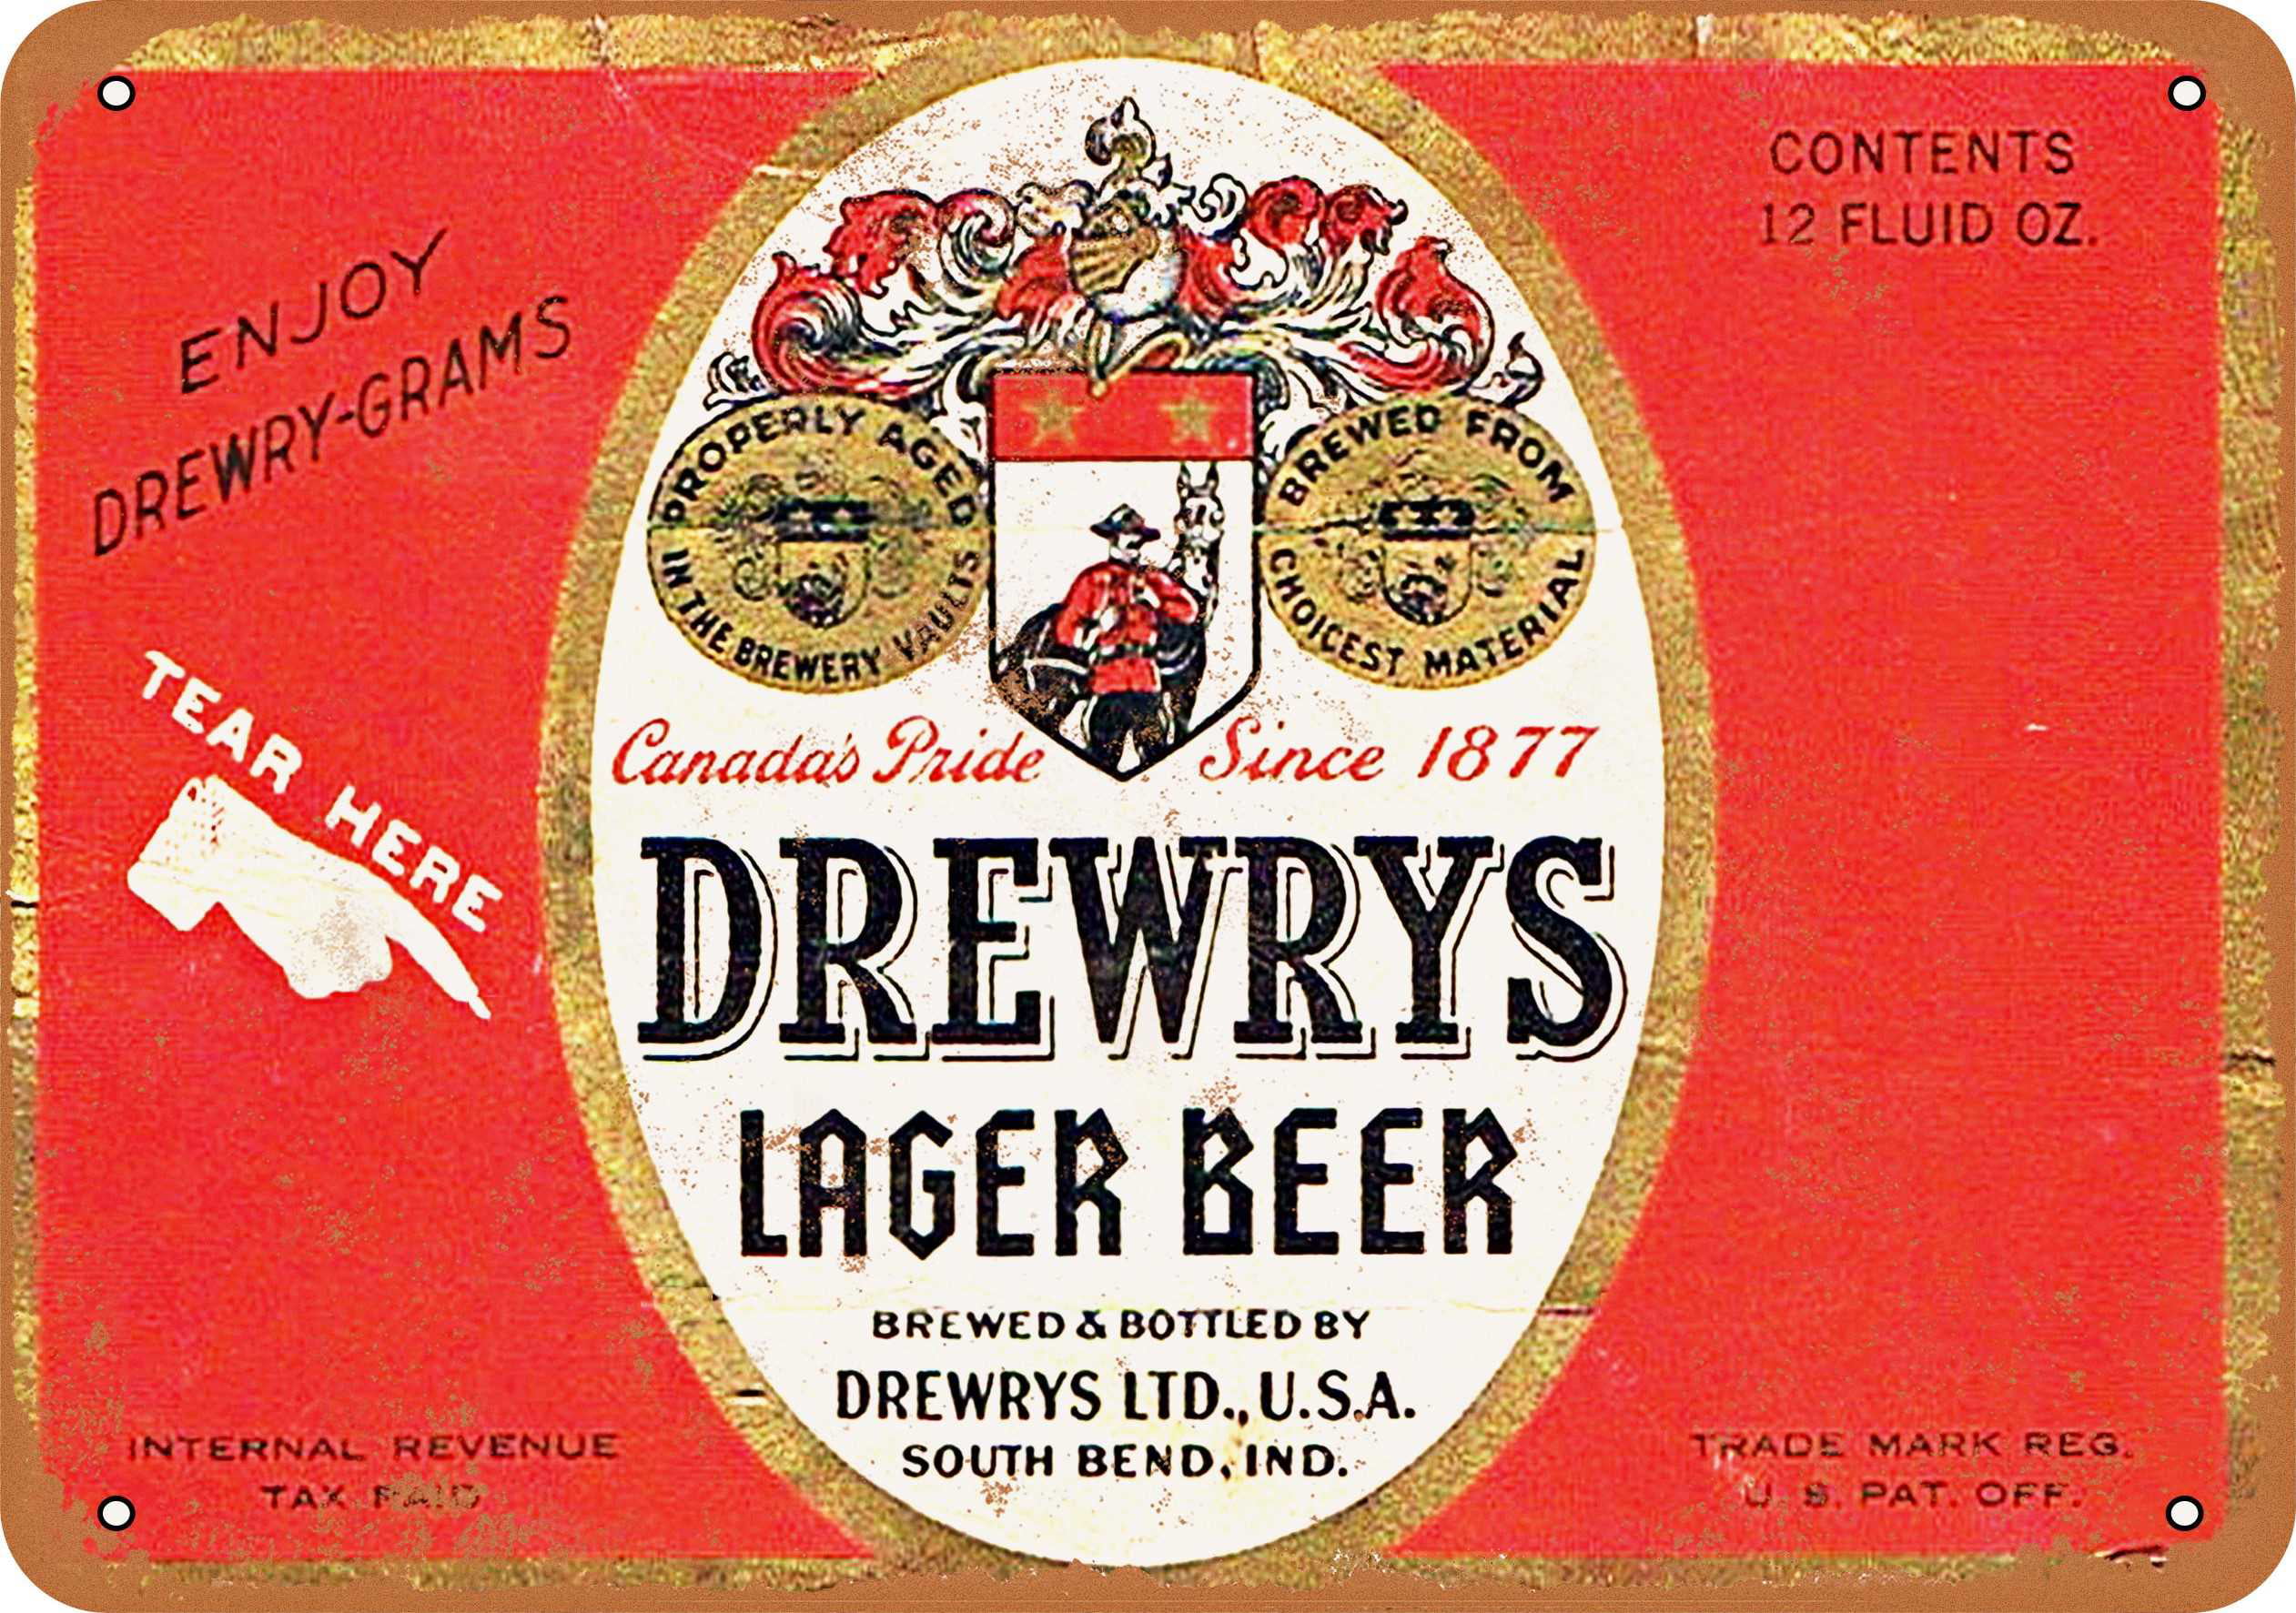 OLD TOWN LAGER BEER LABEL 9" x 12" METAL SIGN